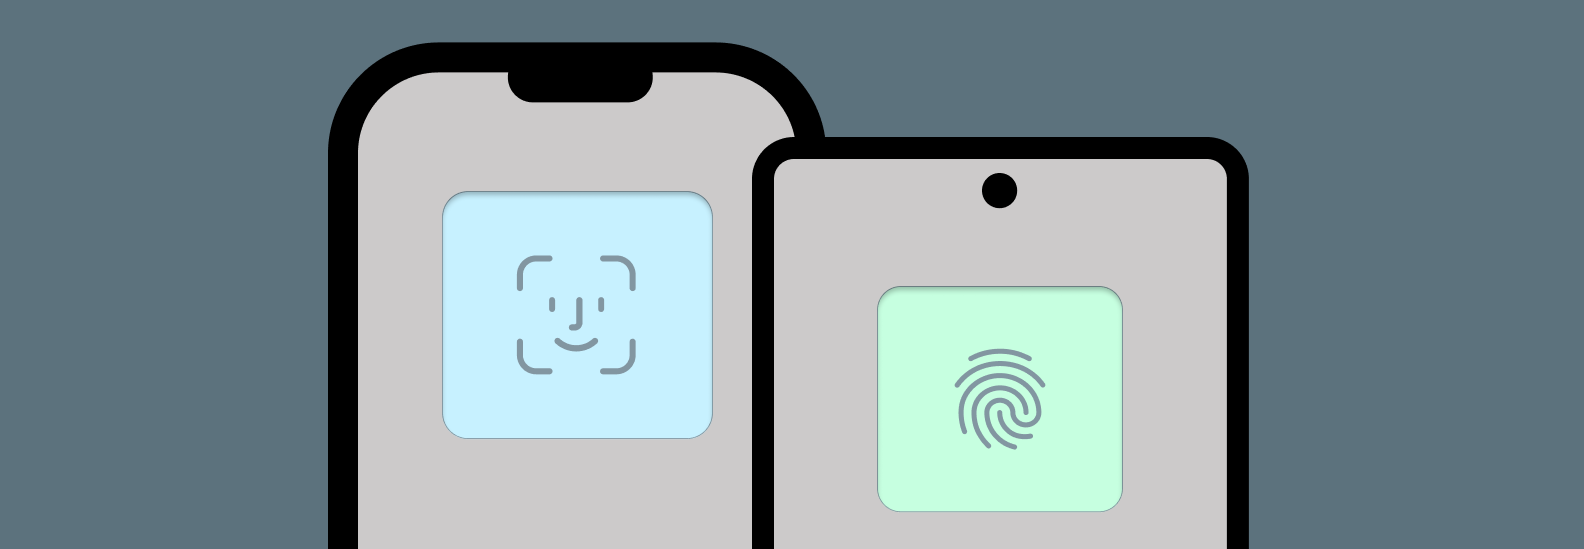 An illustration of two smartphone screens on a gray background – one has a visual prompt for FaceID with a face icon, and the other shows a visual prompt for TouchID with a thumbprint.